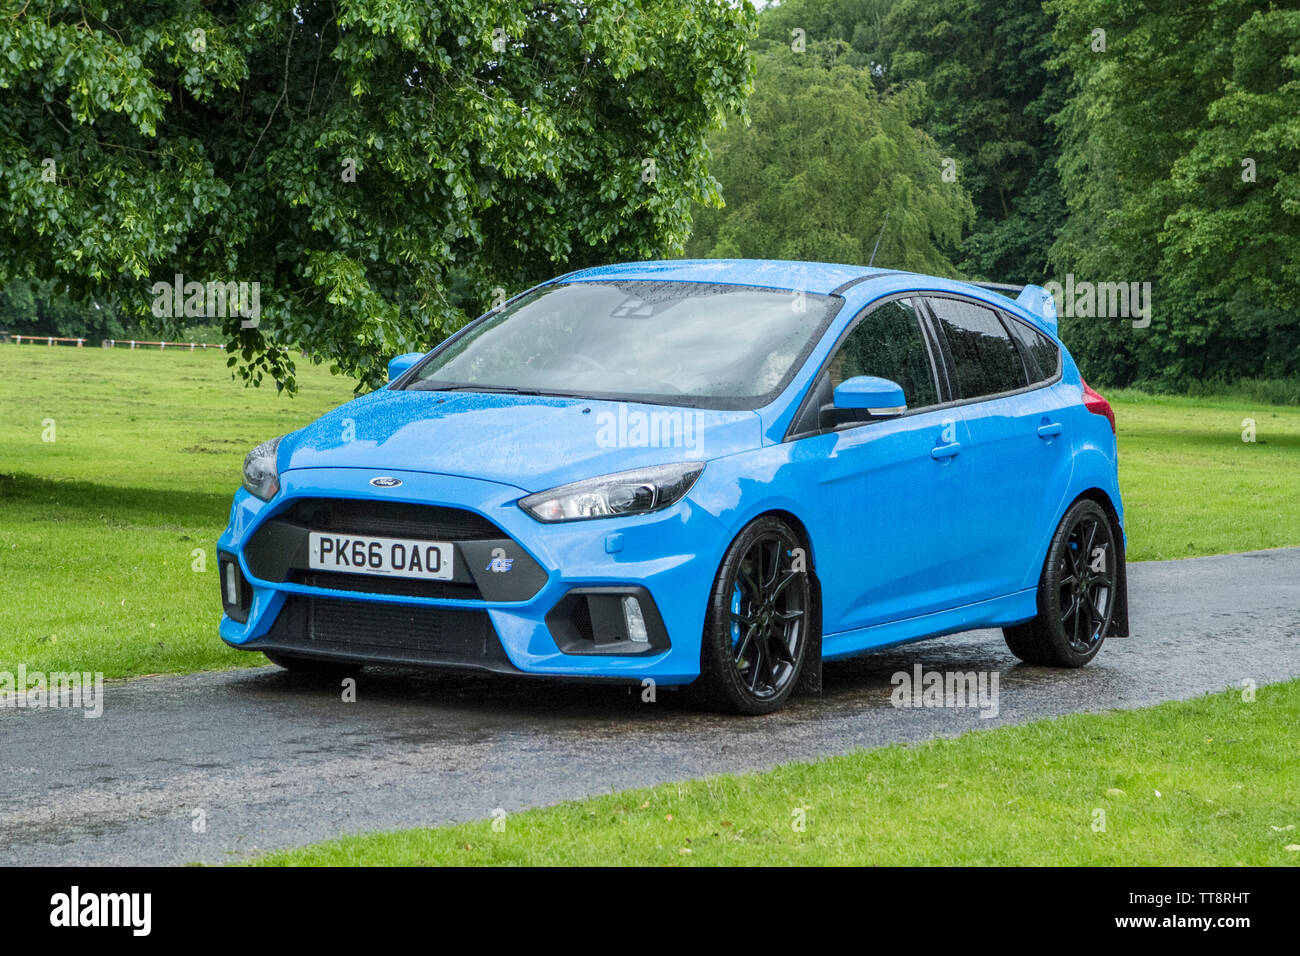 Leyland, Lancashire. UK. Ford Focus RS Popular vintage, American classic collectible veteran super cars, future modern Stock Photo